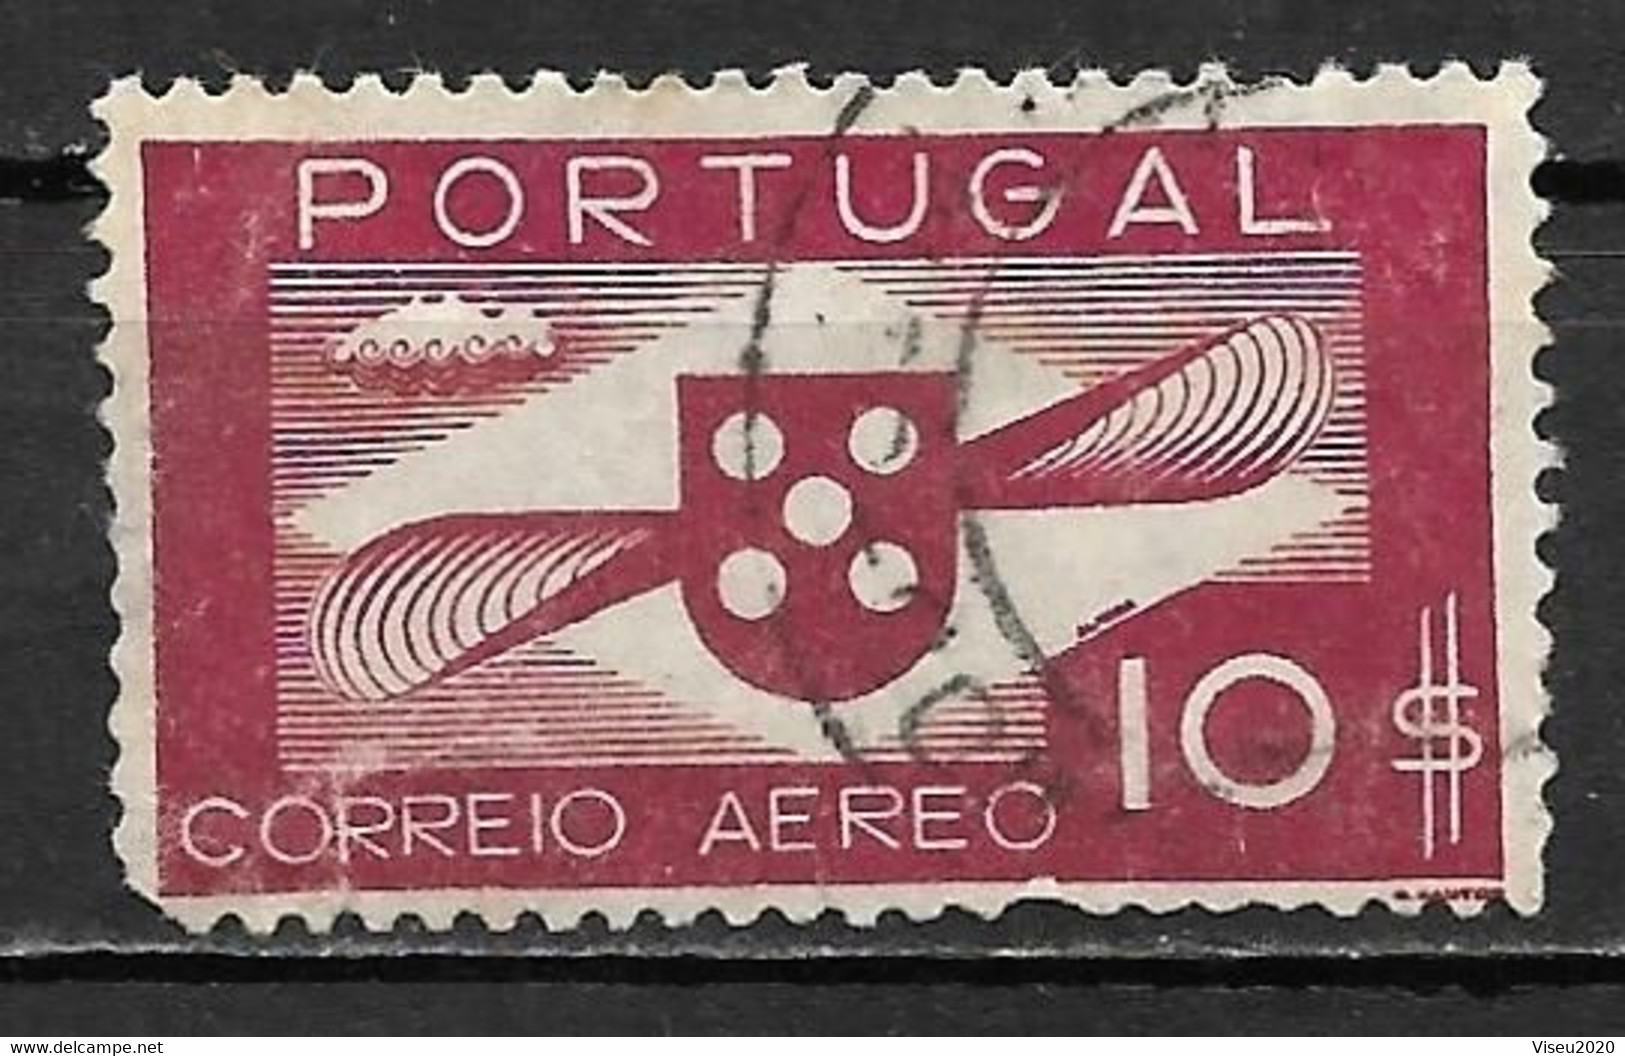 Portugal 1936 - Correio Aéreo - Hélice - Afinsa 07 - Used Stamps